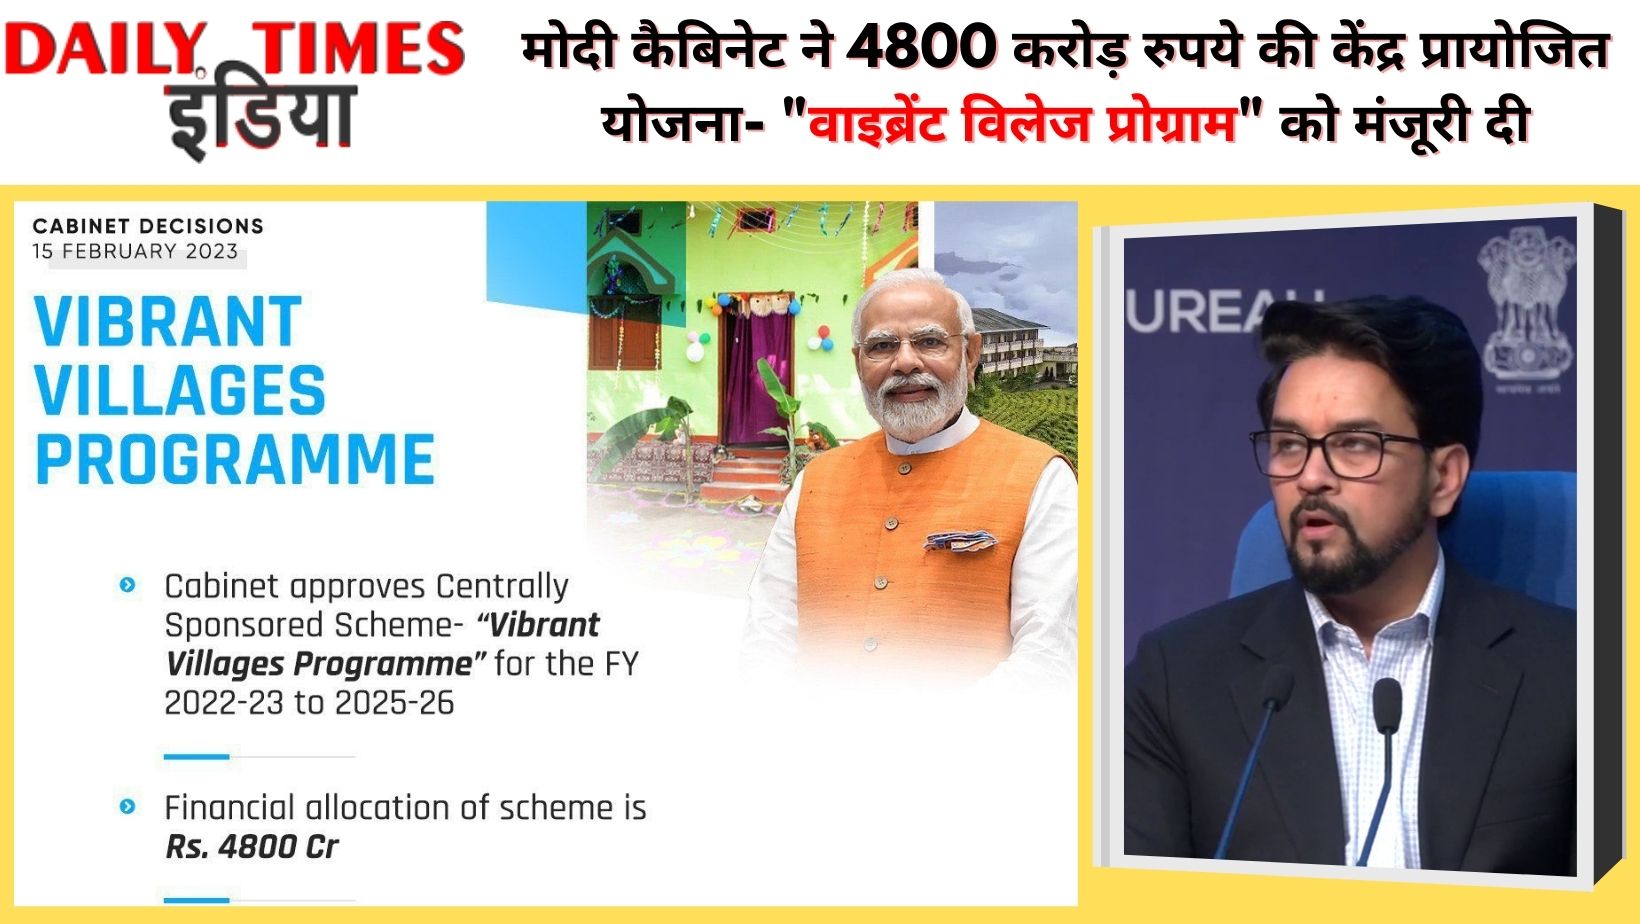 Modi cabinet approves Centrally Sponsored Scheme- “Vibrant Villages Programme” of Rs 4800 Crore